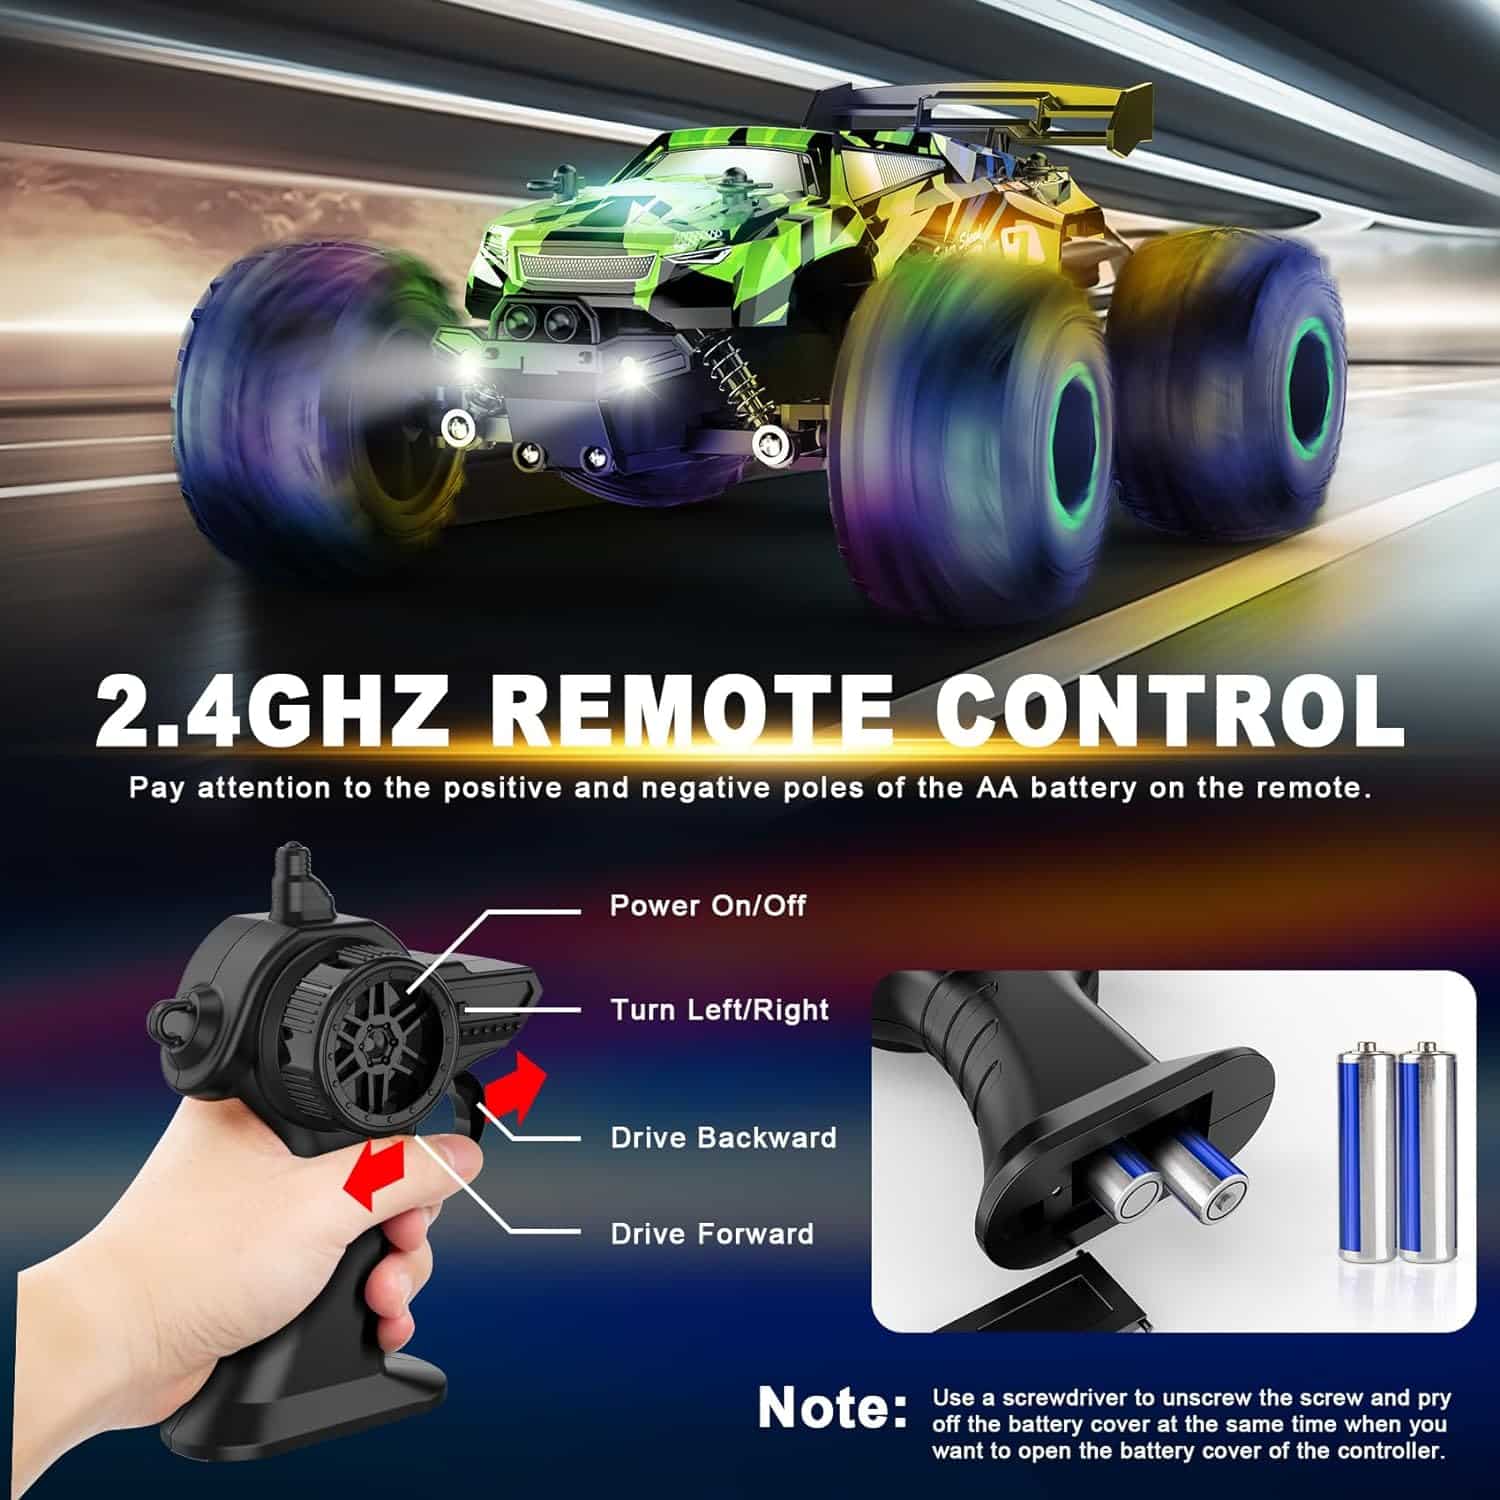 PHYWESS Remote Control Car: A Powerful and Exciting RC Toy for Kids